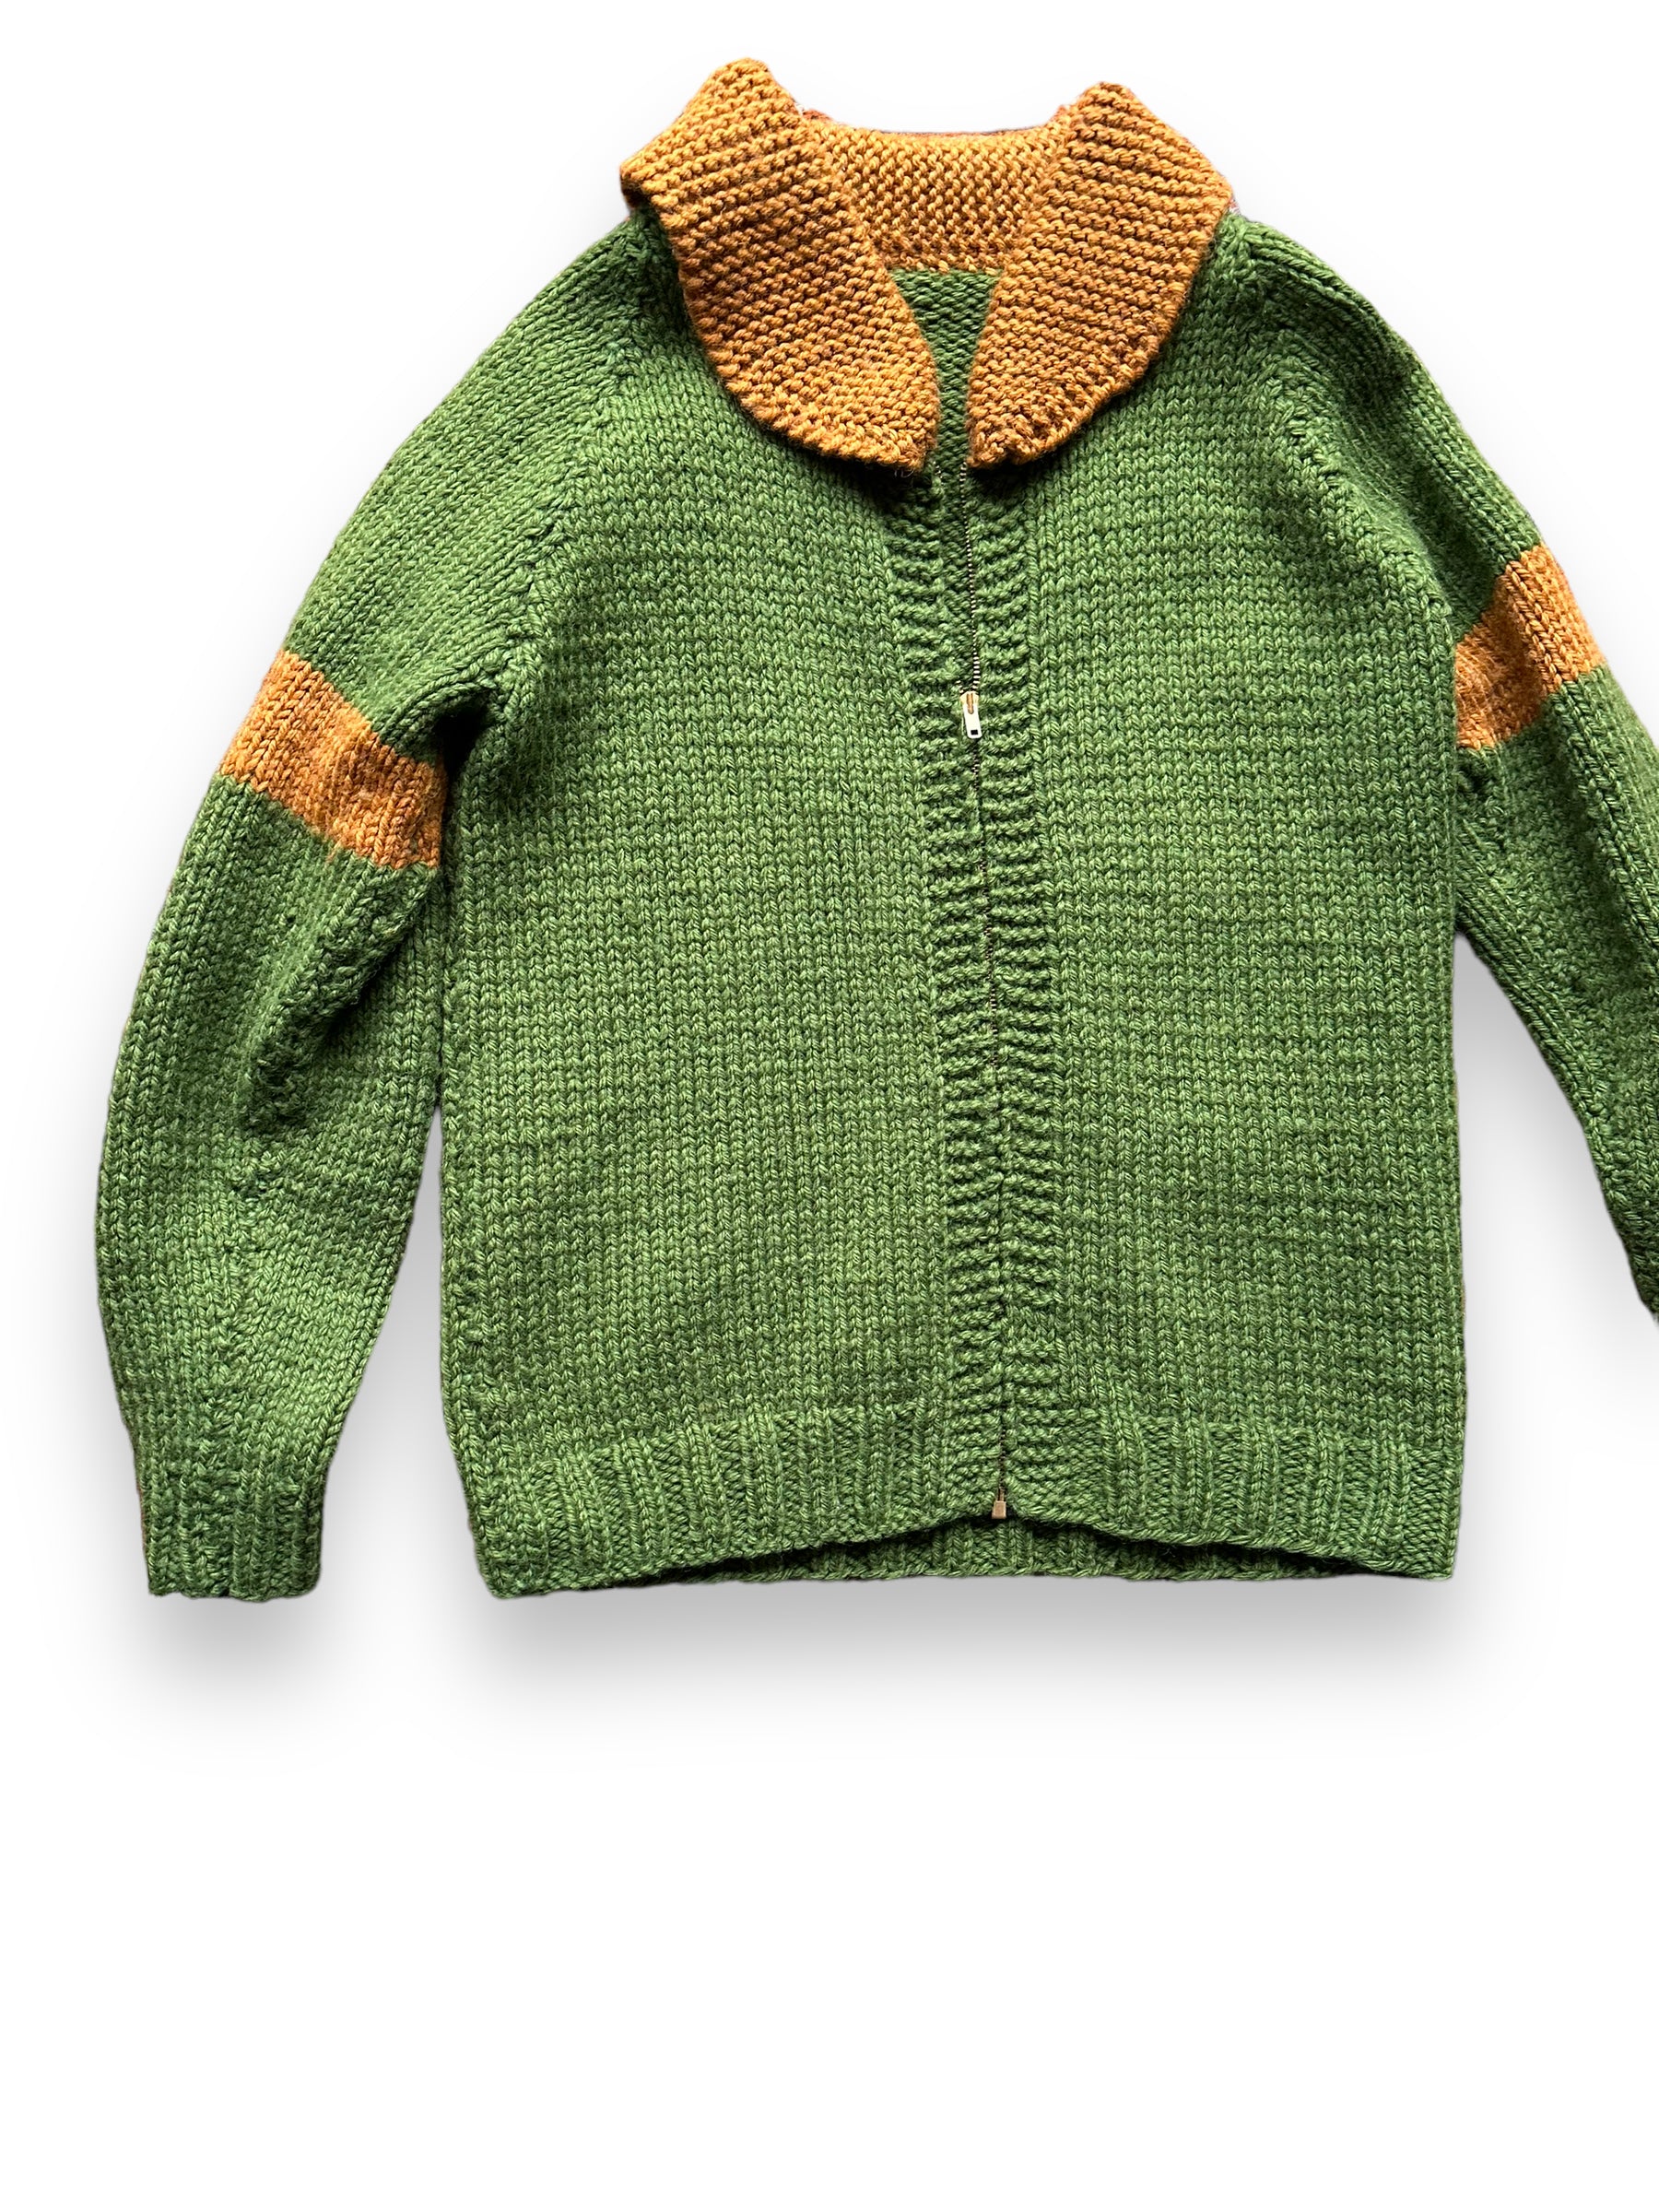 Front Right View of Vintage Green and Brown Striped Handknit Sweater SZ L | Vintage Wool Sweaters Seattle | Barn Owl Vintage Seattle